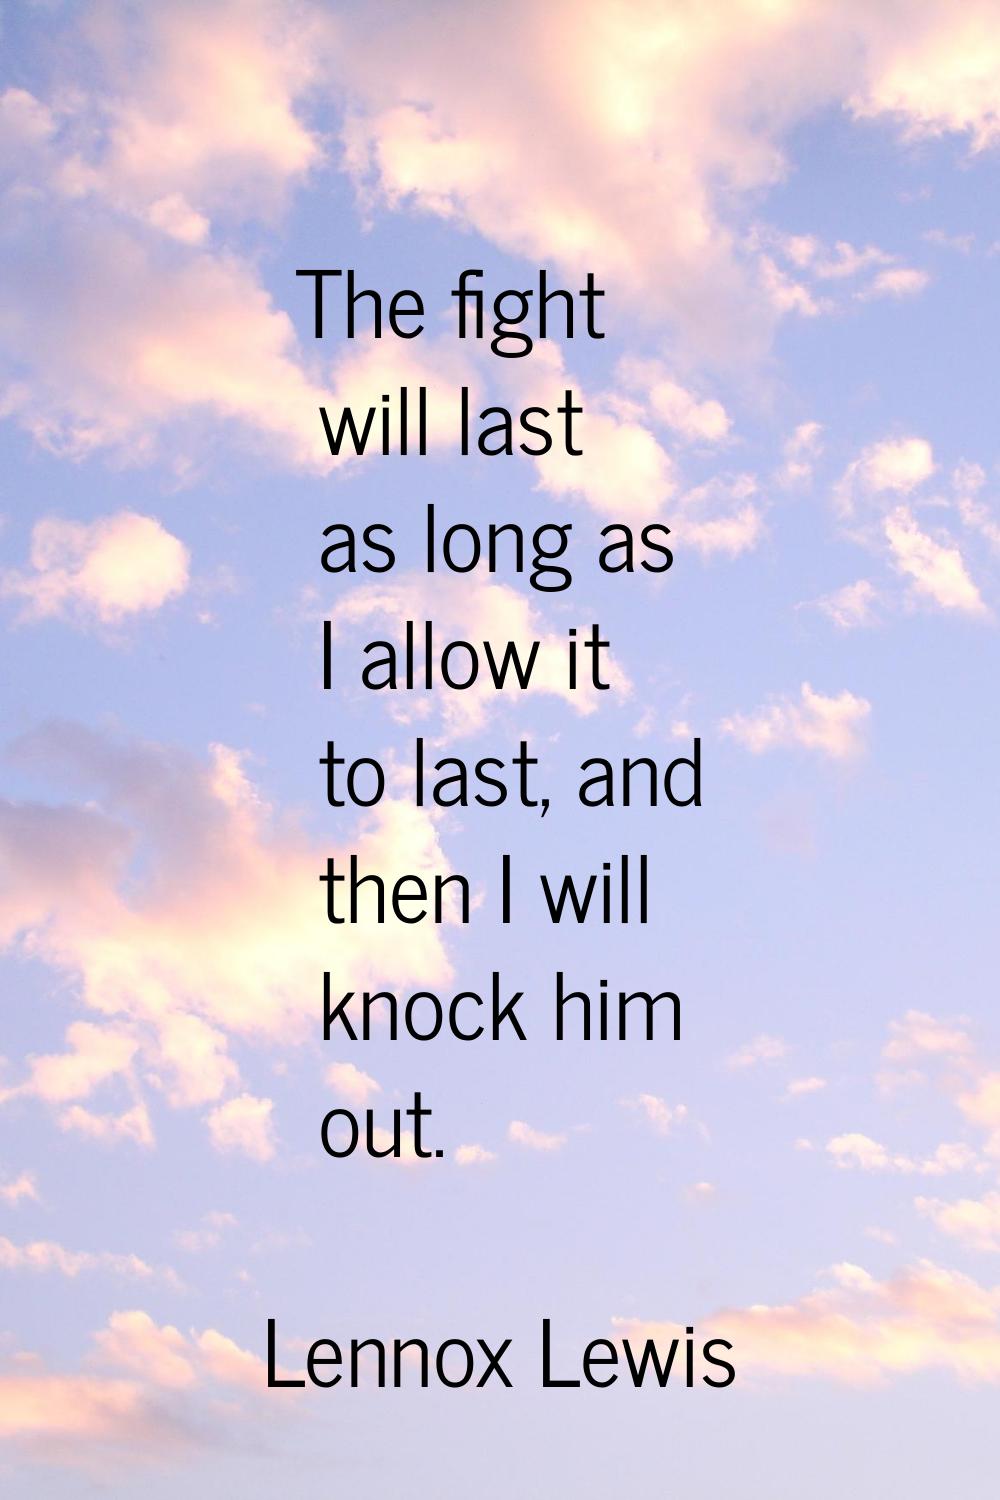 The fight will last as long as I allow it to last, and then I will knock him out.